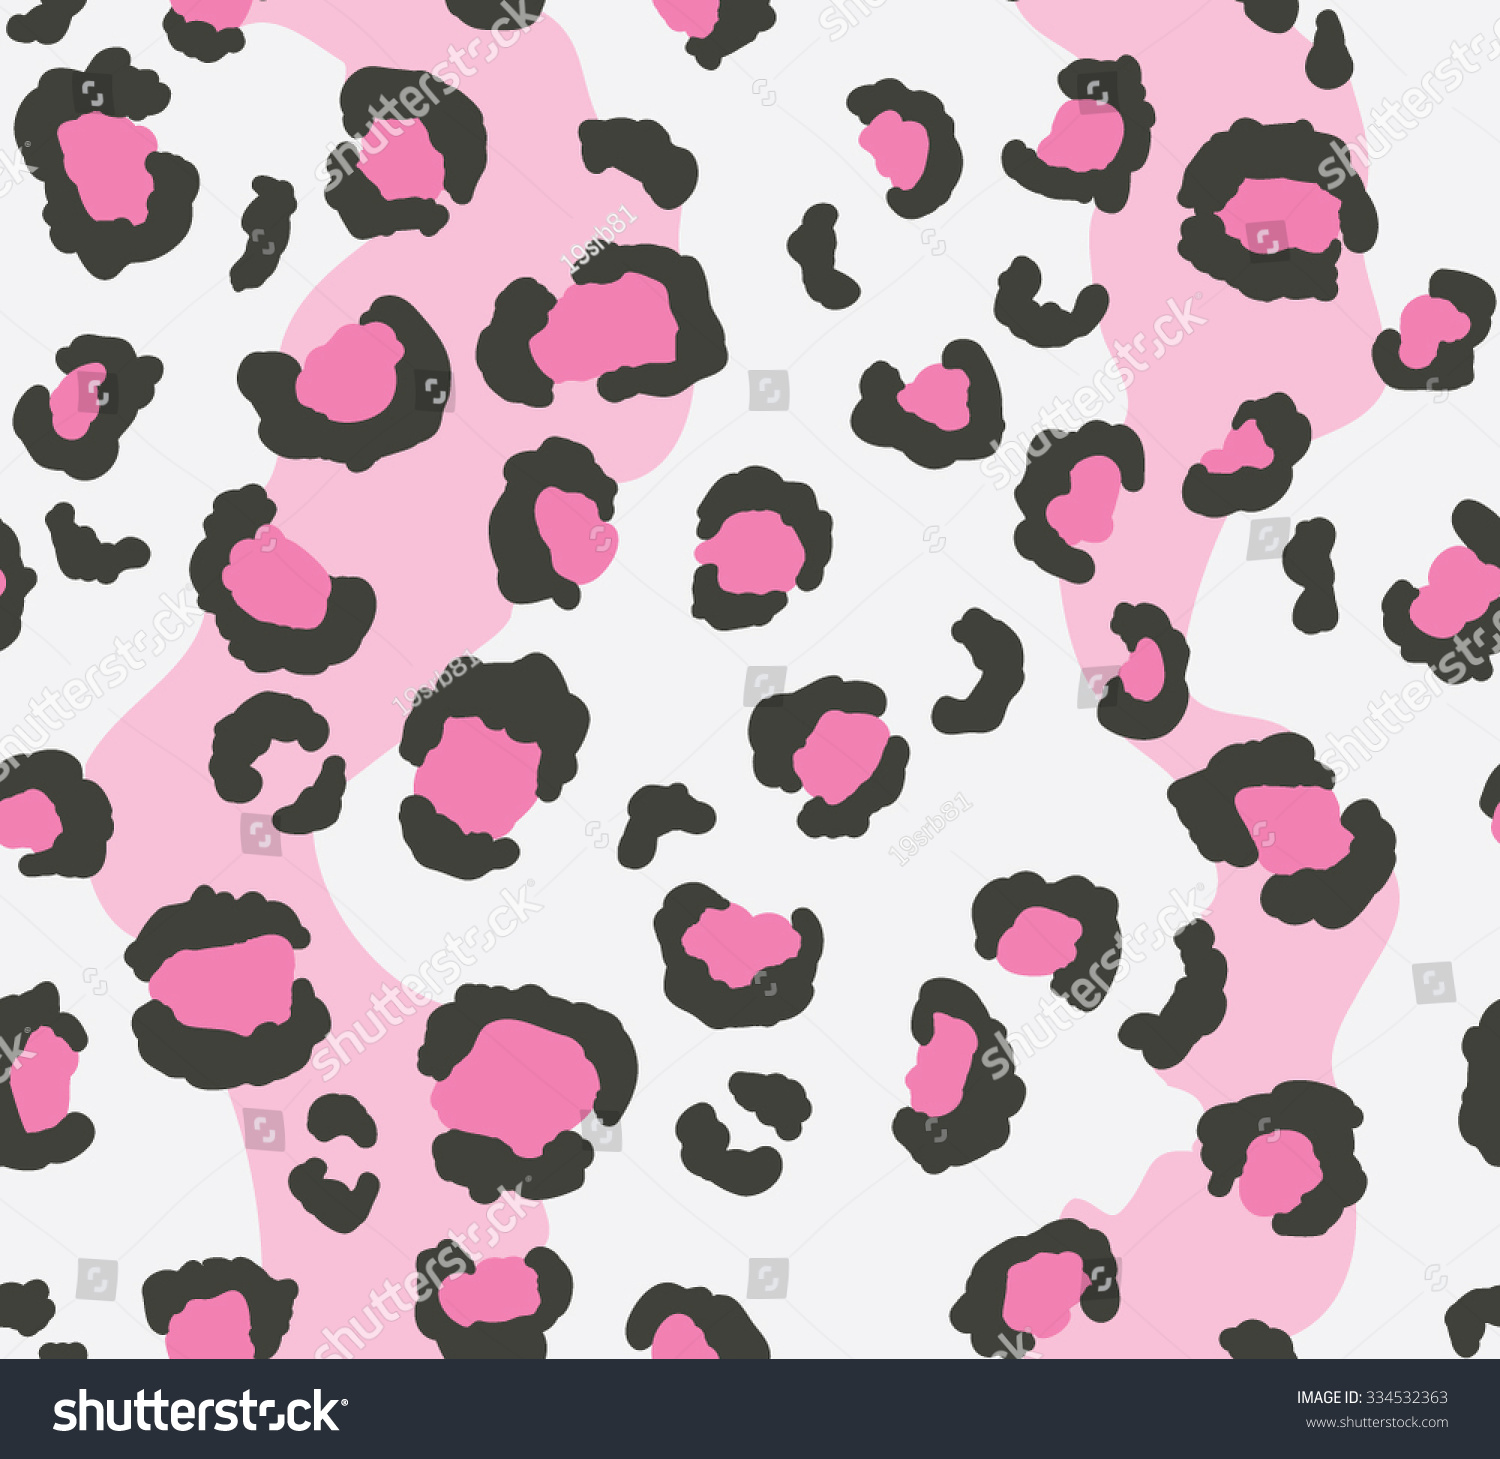 Leopard Skin Texture Seamless Pattern Stock Vector (Royalty Free ...